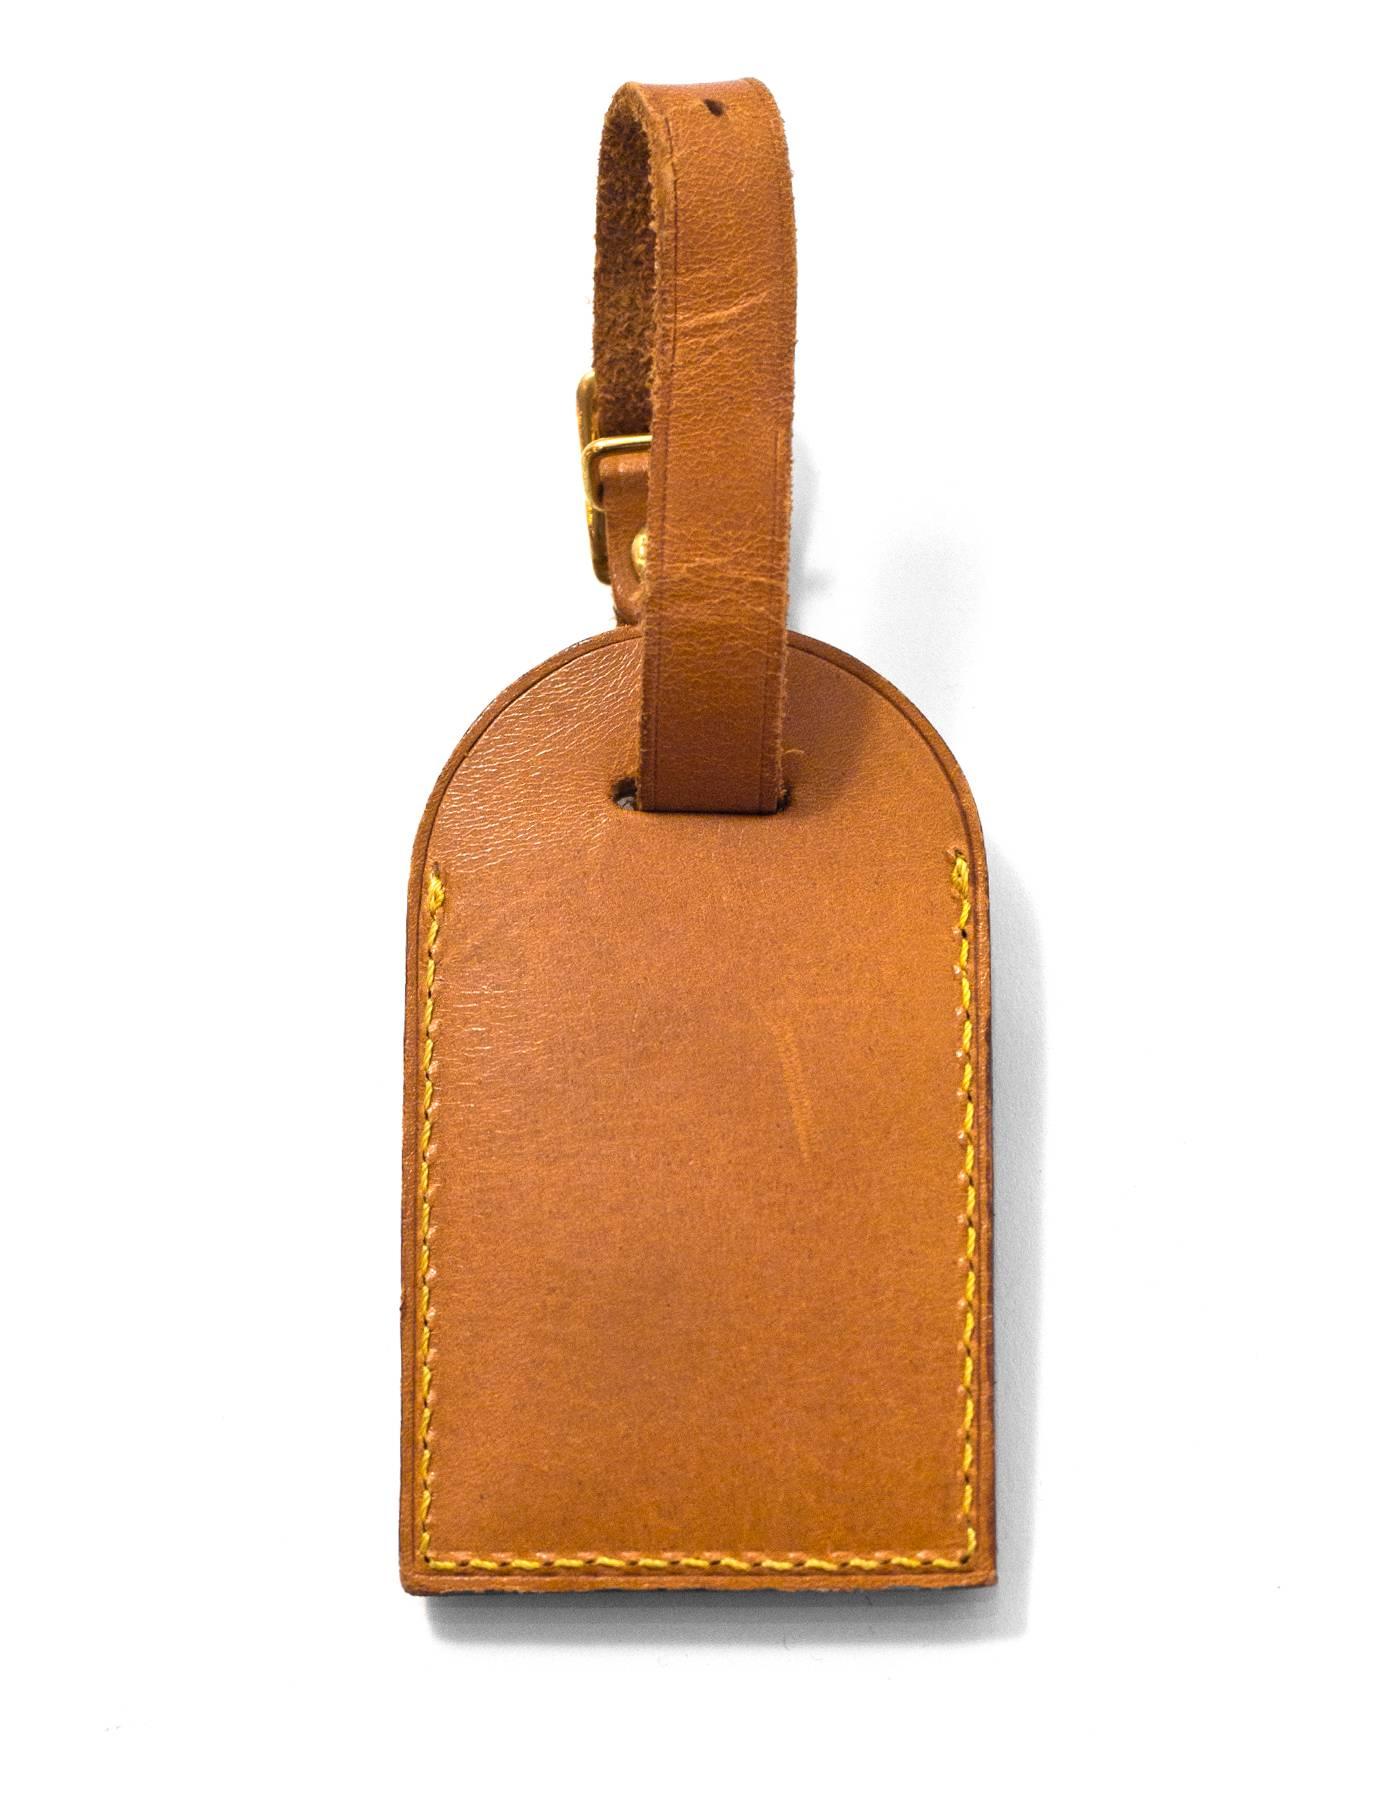 Louis Vuitton Luggage Tag

Made In: France
Color: Tan
Hardware: Goldtone
Materials: Vachetta leather
Closure/Opening: Buckle closure
Overall Condition: Very good pre-owned condition with the exception of cracking at strap, faint surface